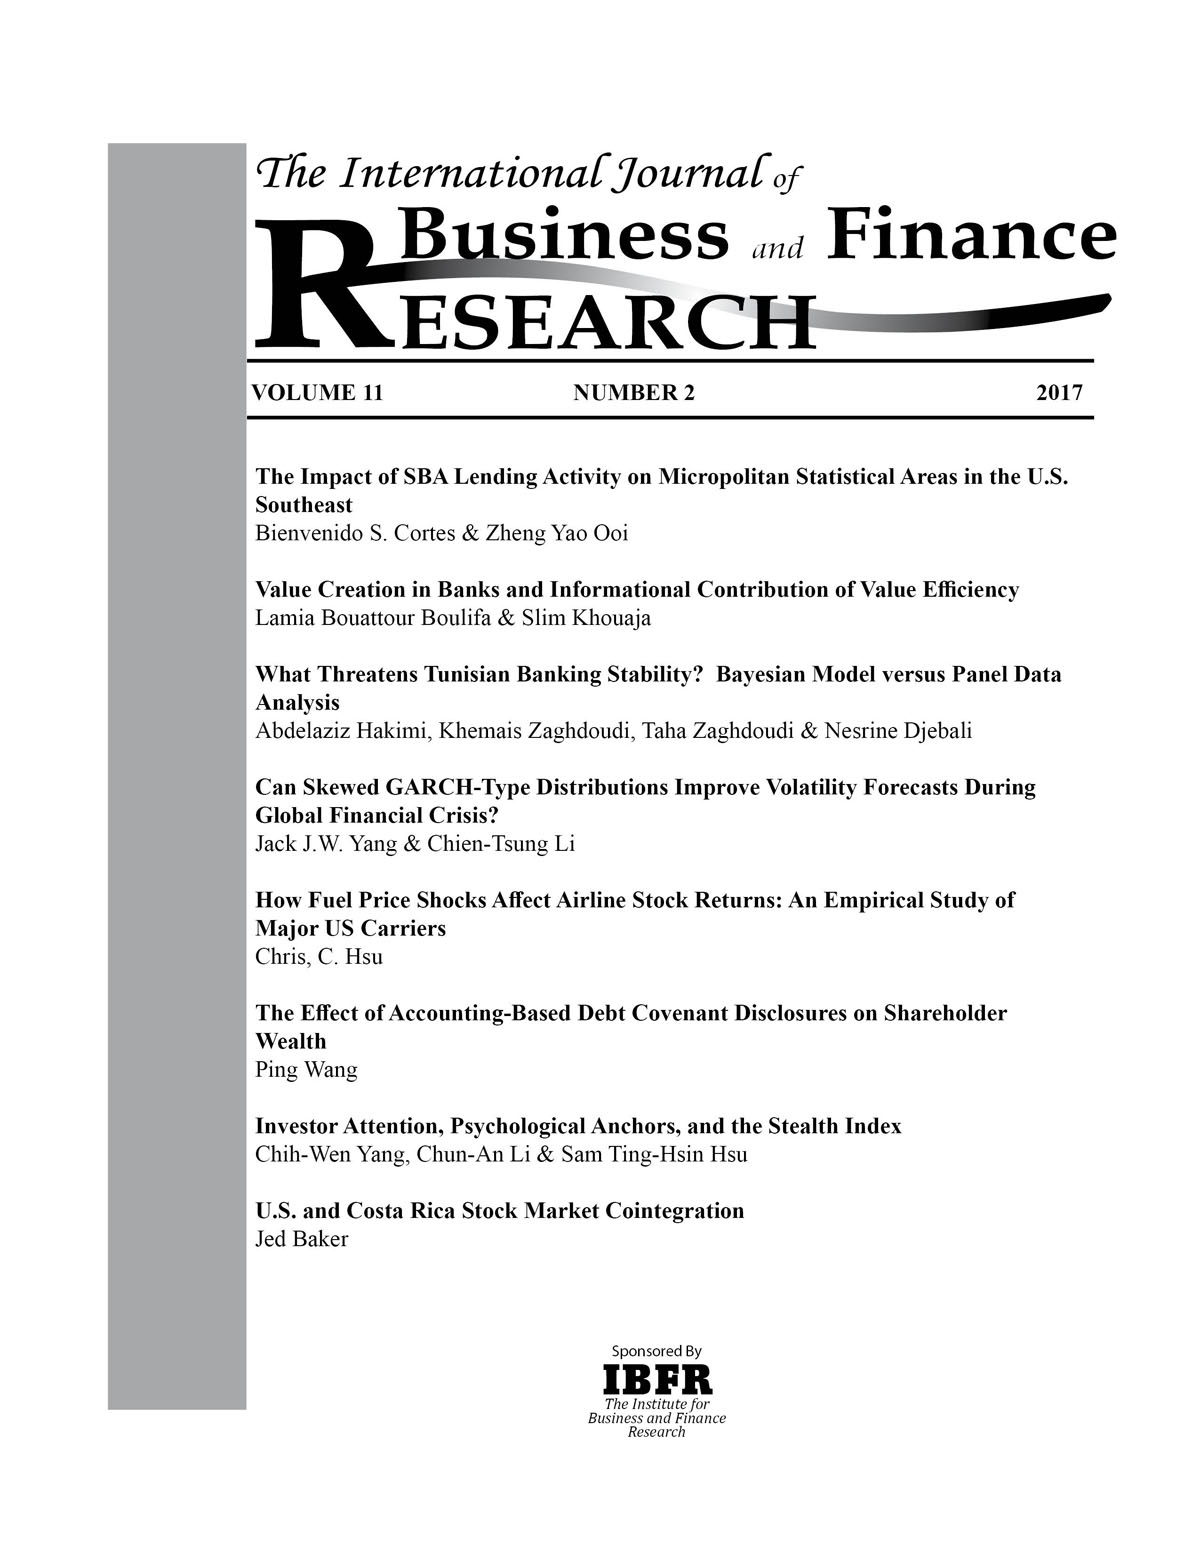 article of business research